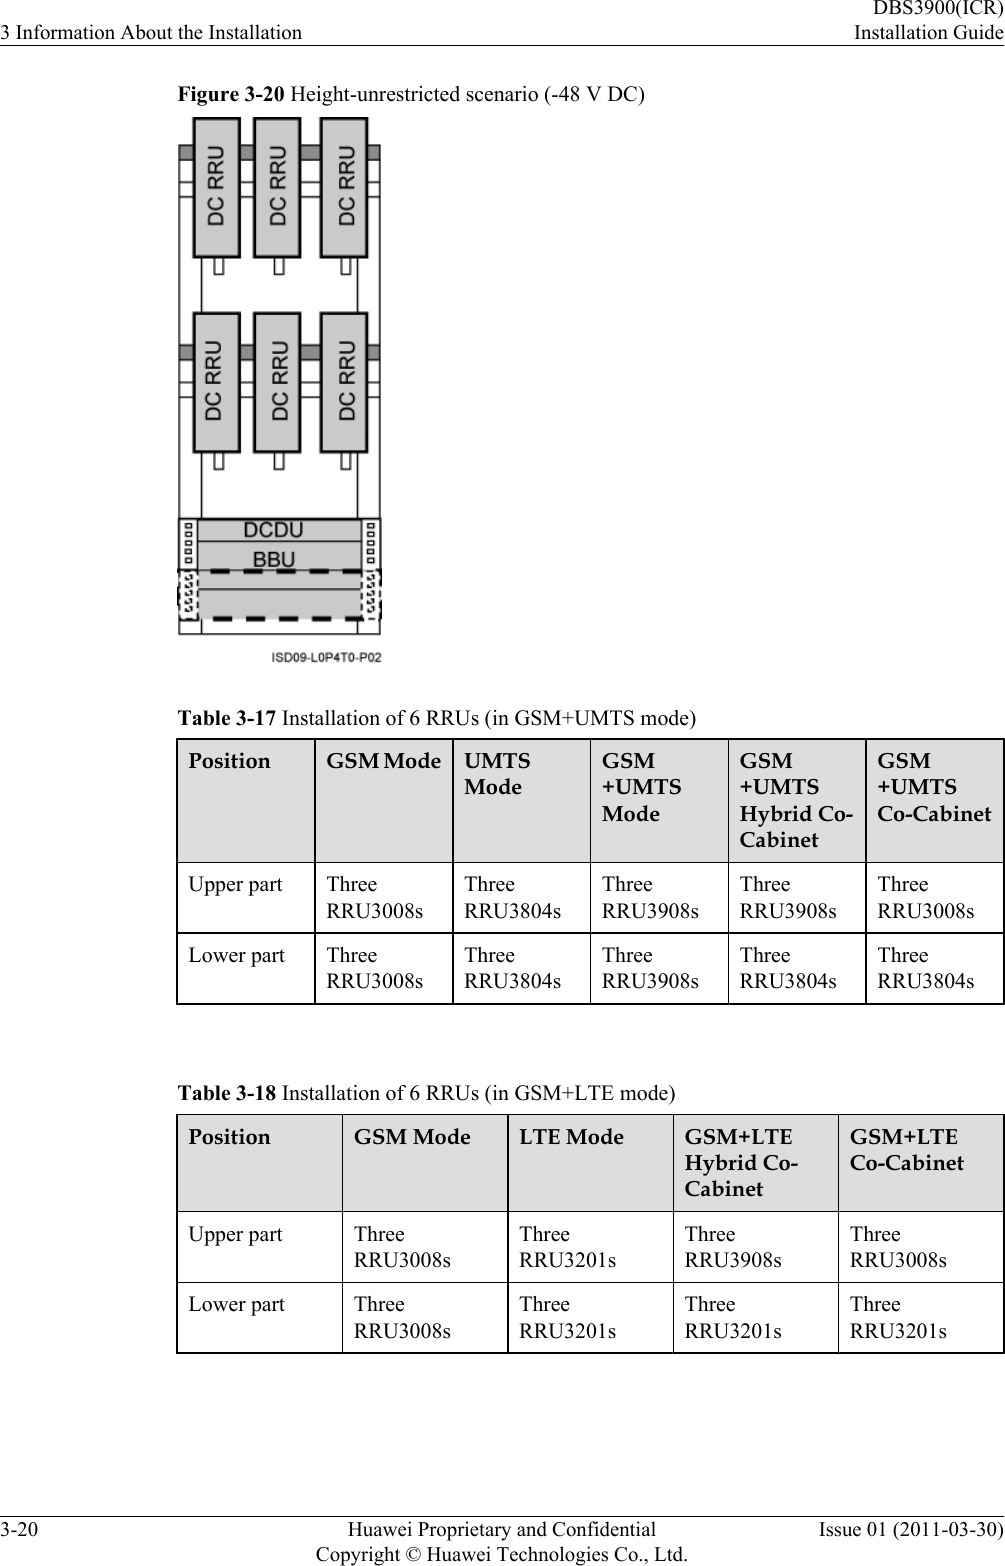 Figure 3-20 Height-unrestricted scenario (-48 V DC)Table 3-17 Installation of 6 RRUs (in GSM+UMTS mode)Position GSM Mode UMTSModeGSM+UMTSModeGSM+UMTSHybrid Co-CabinetGSM+UMTSCo-CabinetUpper part ThreeRRU3008sThreeRRU3804sThreeRRU3908sThreeRRU3908sThreeRRU3008sLower part ThreeRRU3008sThreeRRU3804sThreeRRU3908sThreeRRU3804sThreeRRU3804s Table 3-18 Installation of 6 RRUs (in GSM+LTE mode)Position GSM Mode LTE Mode GSM+LTEHybrid Co-CabinetGSM+LTECo-CabinetUpper part ThreeRRU3008sThreeRRU3201sThreeRRU3908sThreeRRU3008sLower part ThreeRRU3008sThreeRRU3201sThreeRRU3201sThreeRRU3201s 3 Information About the InstallationDBS3900(ICR)Installation Guide3-20 Huawei Proprietary and ConfidentialCopyright © Huawei Technologies Co., Ltd.Issue 01 (2011-03-30)